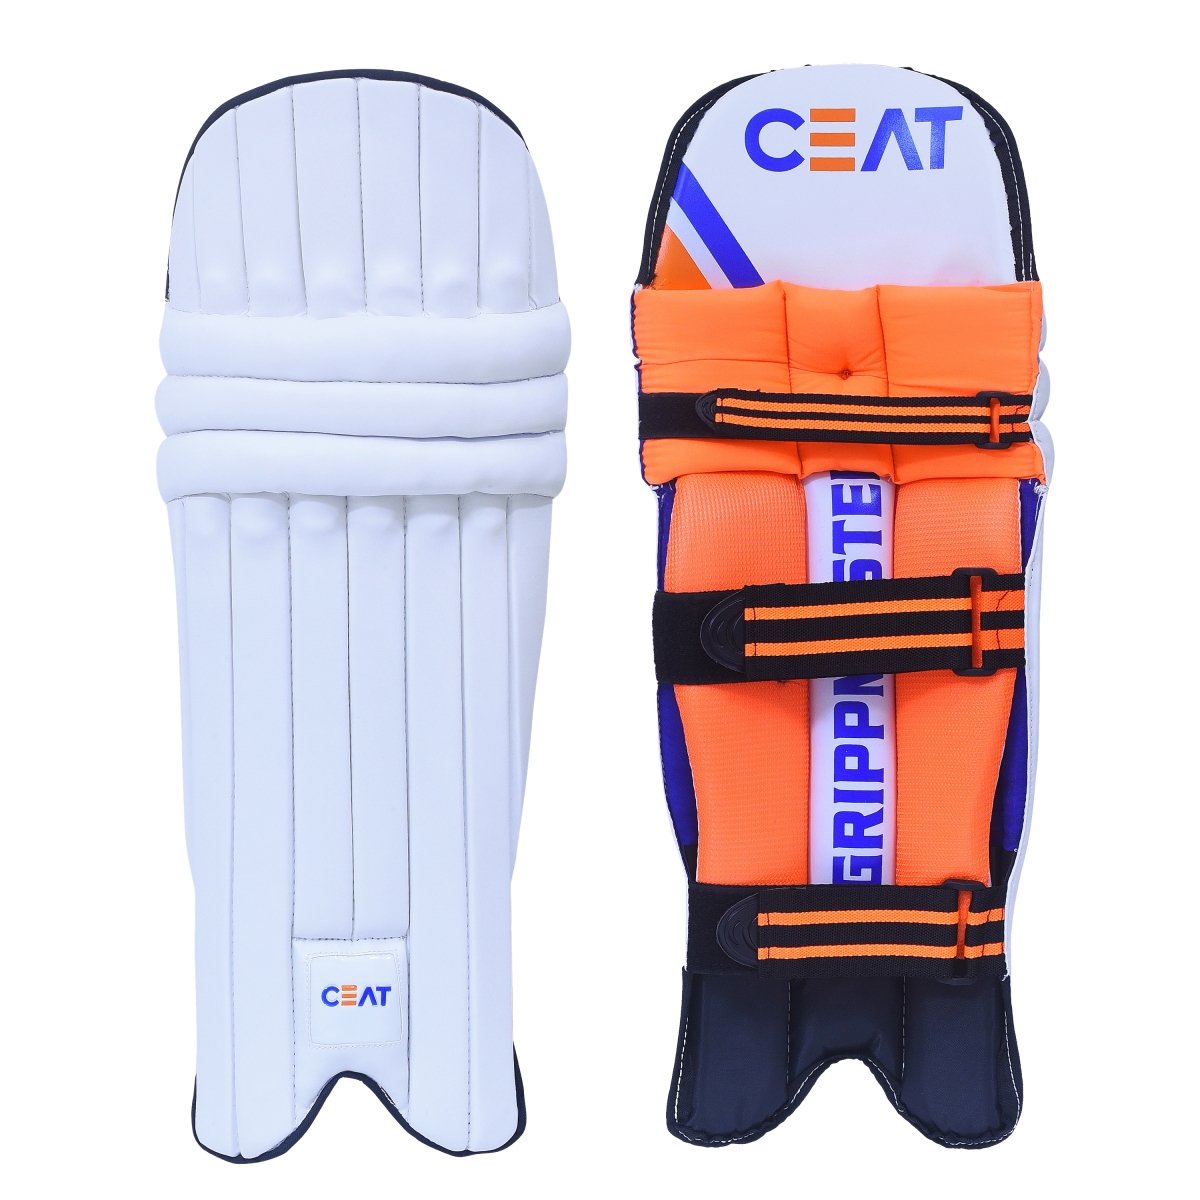 CEAT Gripp Master Youth Cricket Batting Pads.